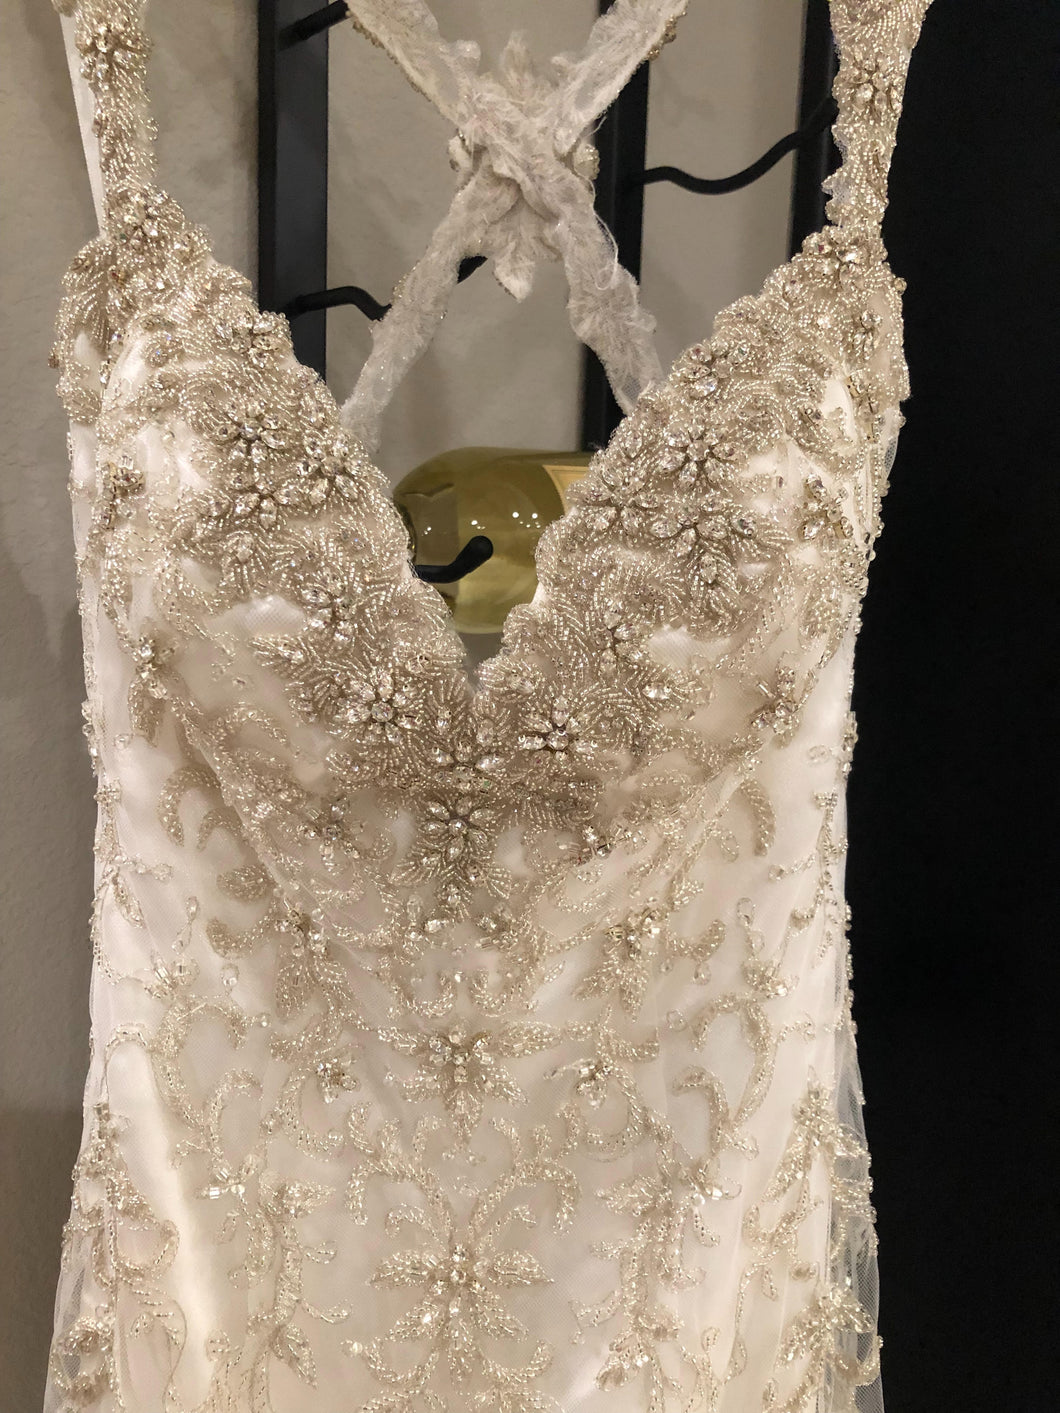 Kitty Chen 'Evelyn' size 2 used wedding dress front view on hanger